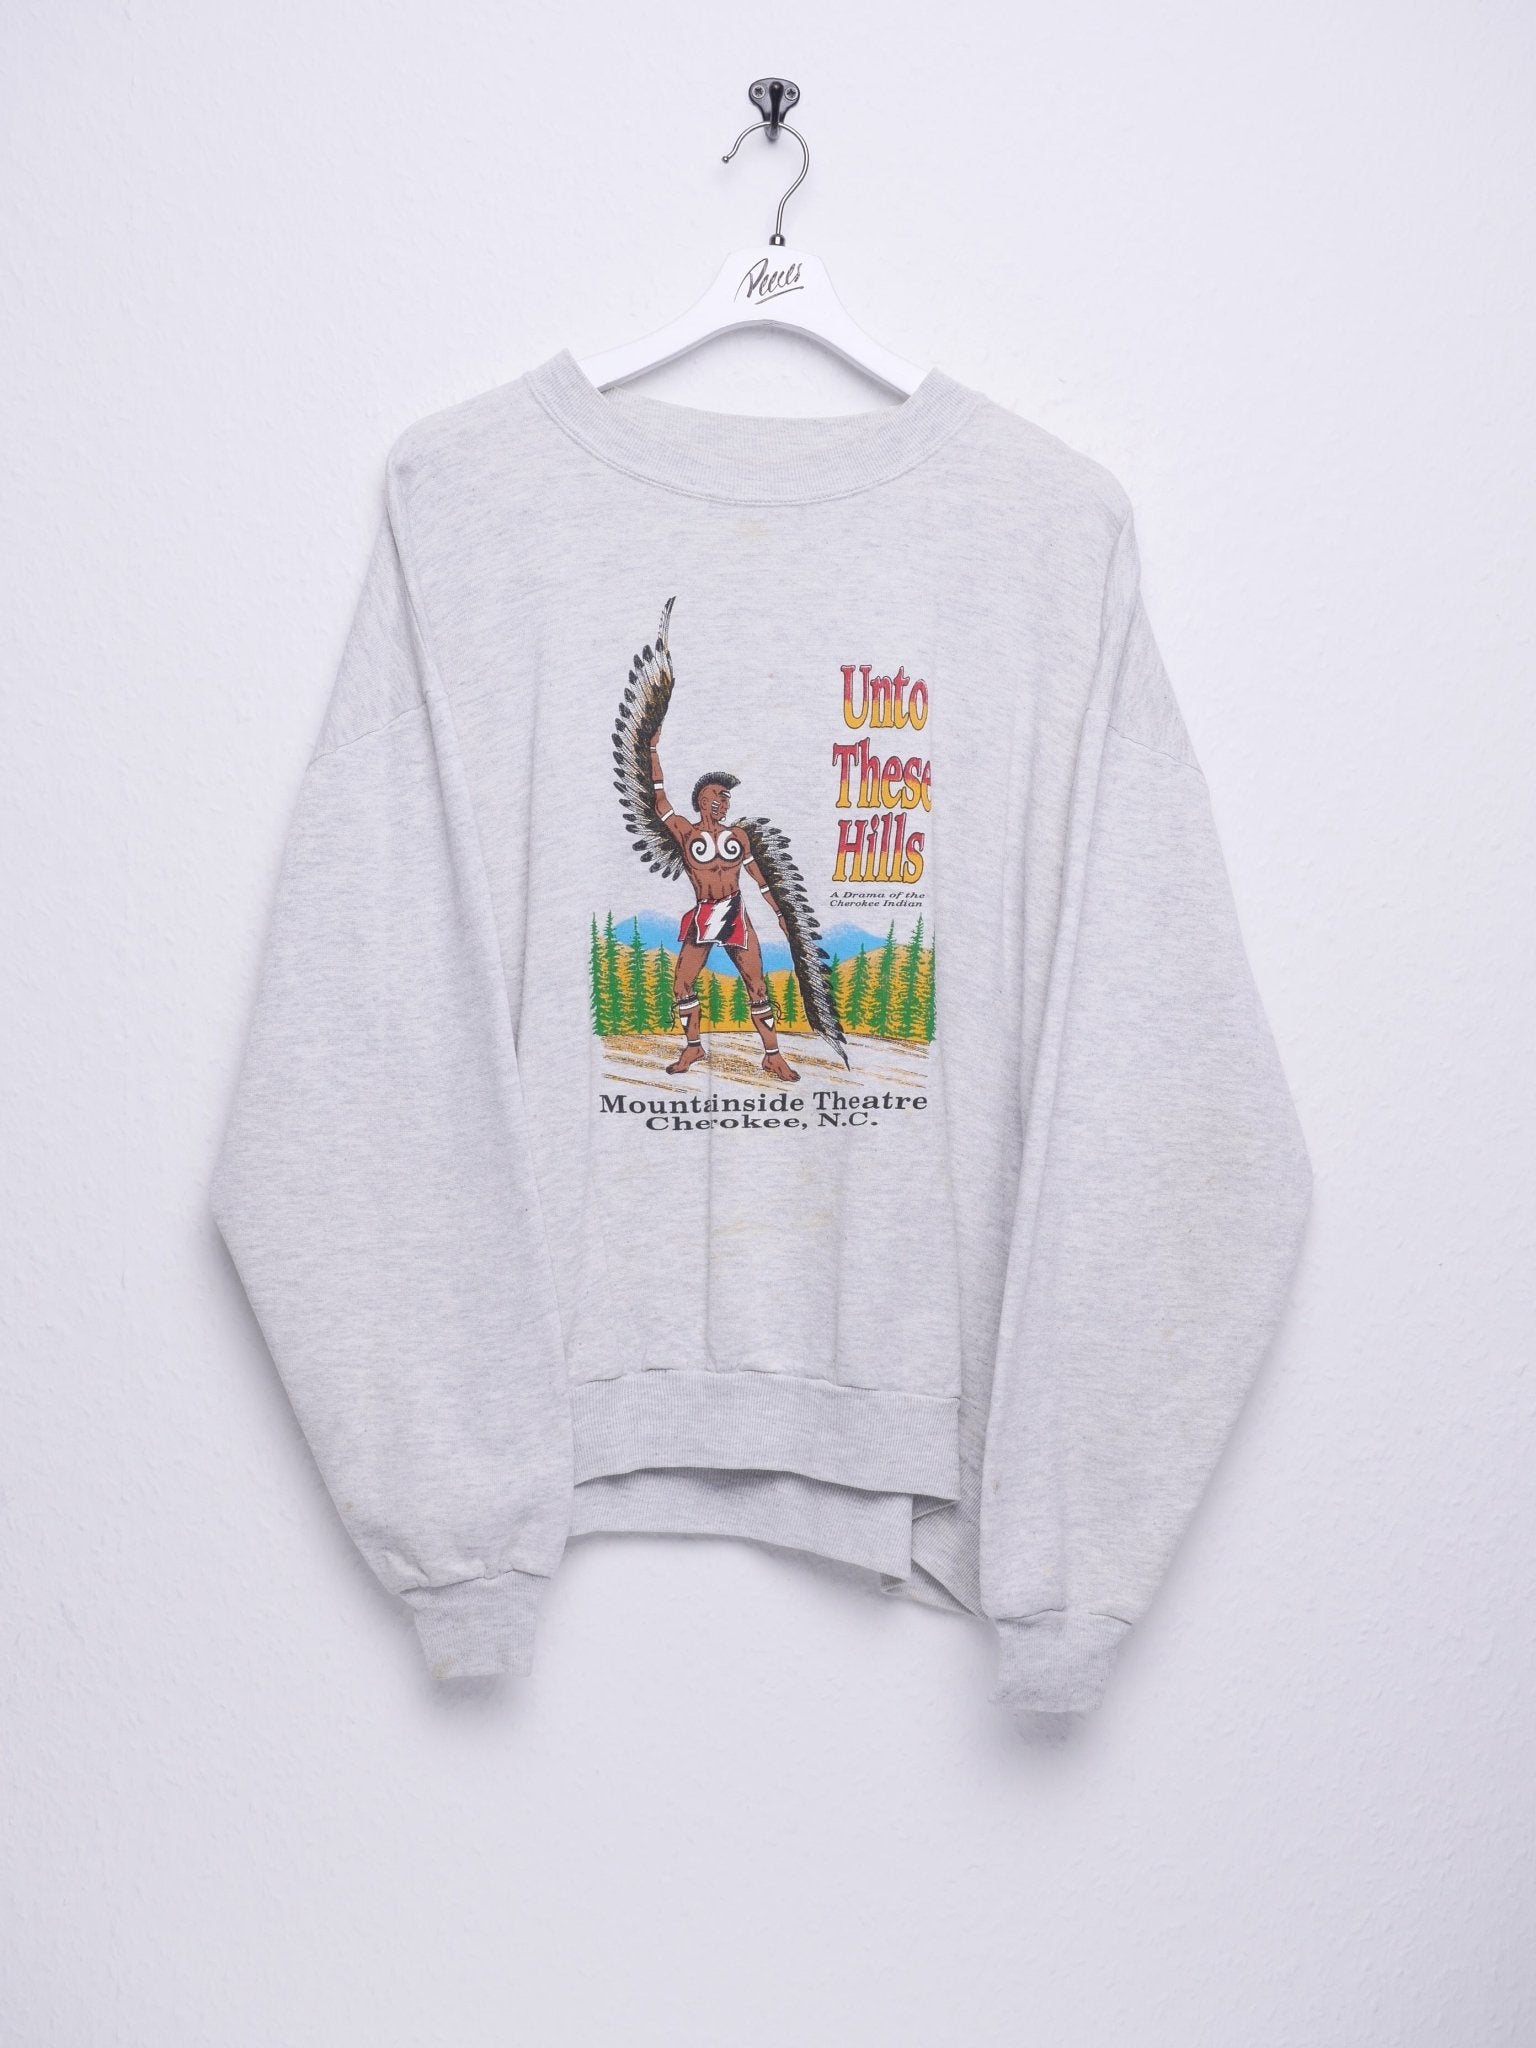 printed Graphic Vintage 'Mountainside Theatre' oversized grey Sweater - Peeces